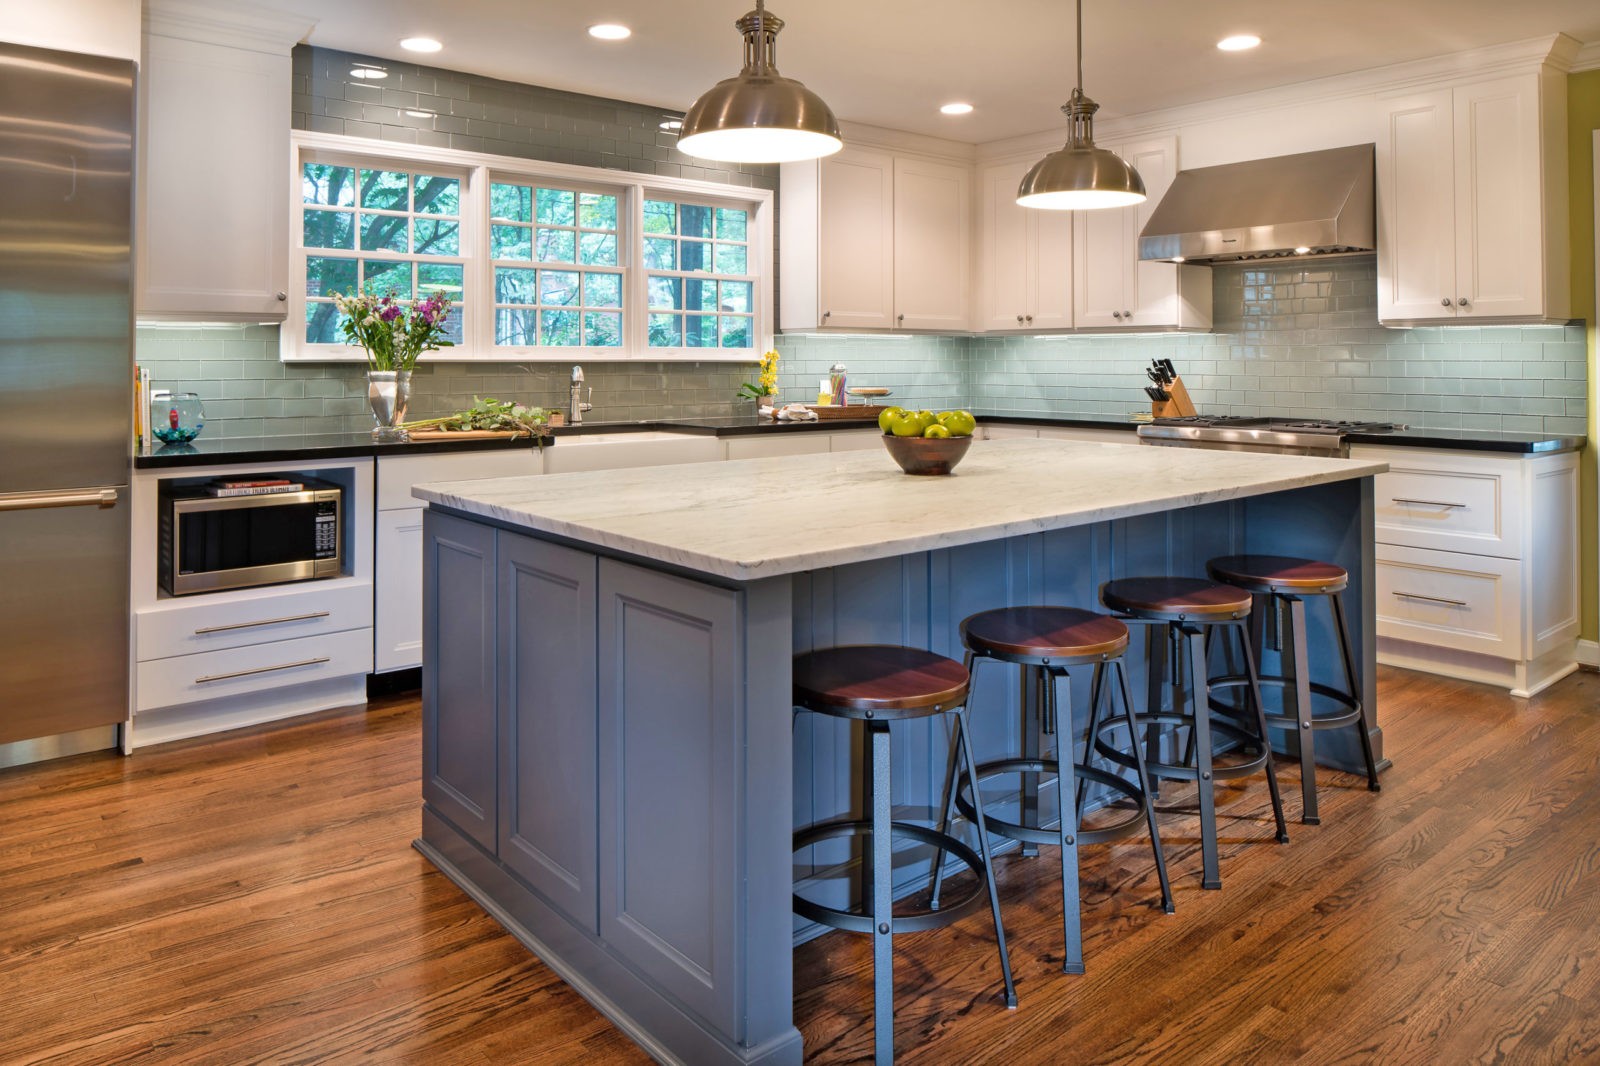 Honed Carrara marble on this dark gray island creates a focal point in this Charlotte, NC kitchen remodel